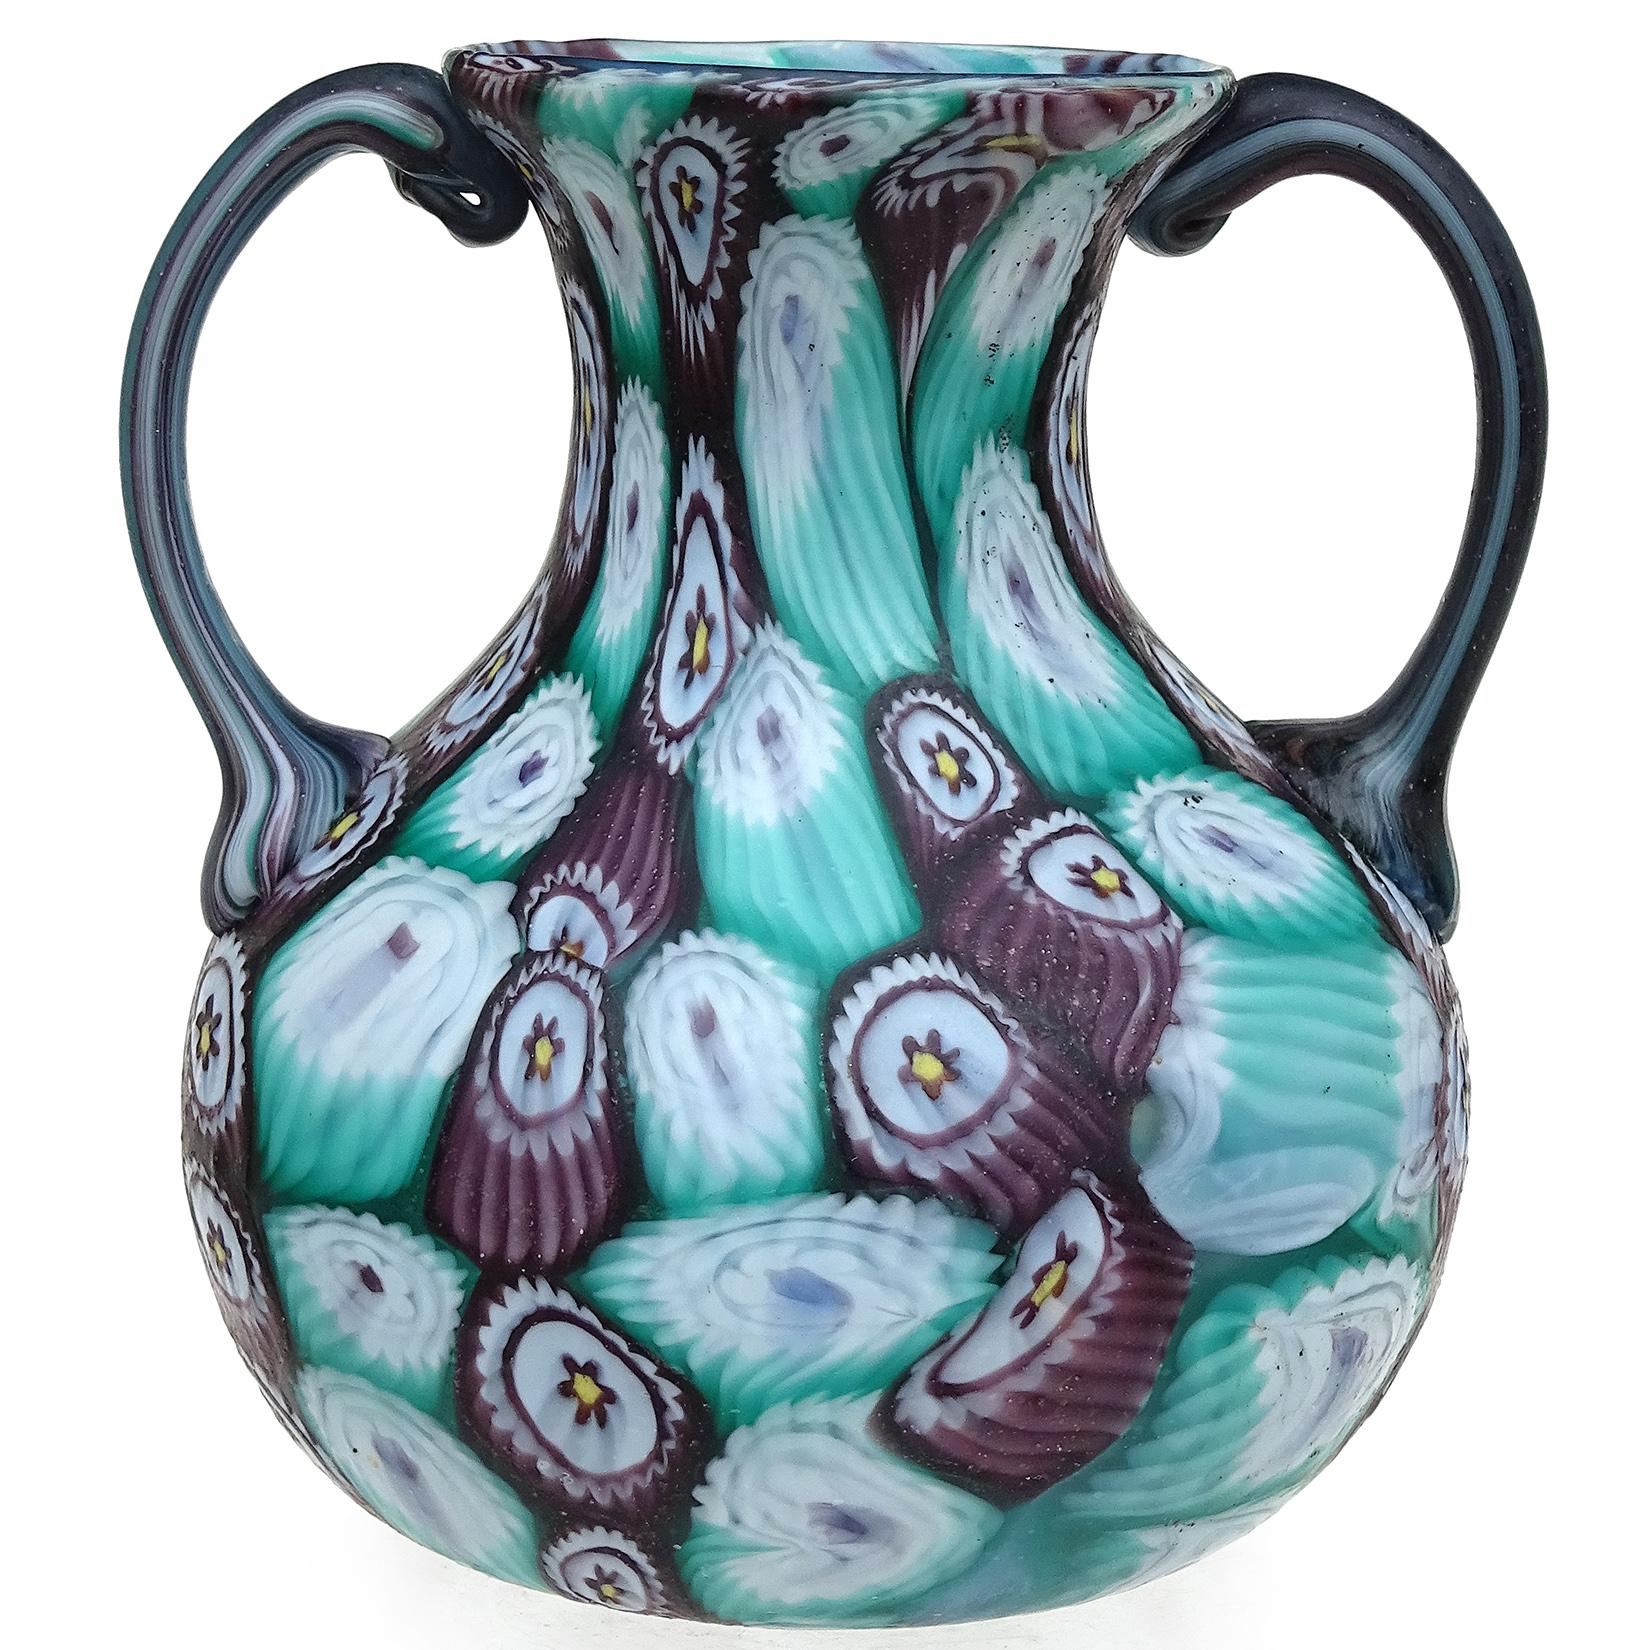 Beautiful antique Murano hand blown millefiori flower mosaic Italian art glass decorative double handles vase. Documented to the Fratelli Toso company, circa 1910-1930. It has a bulbous shape with vertical rows of light blue with white, and purple